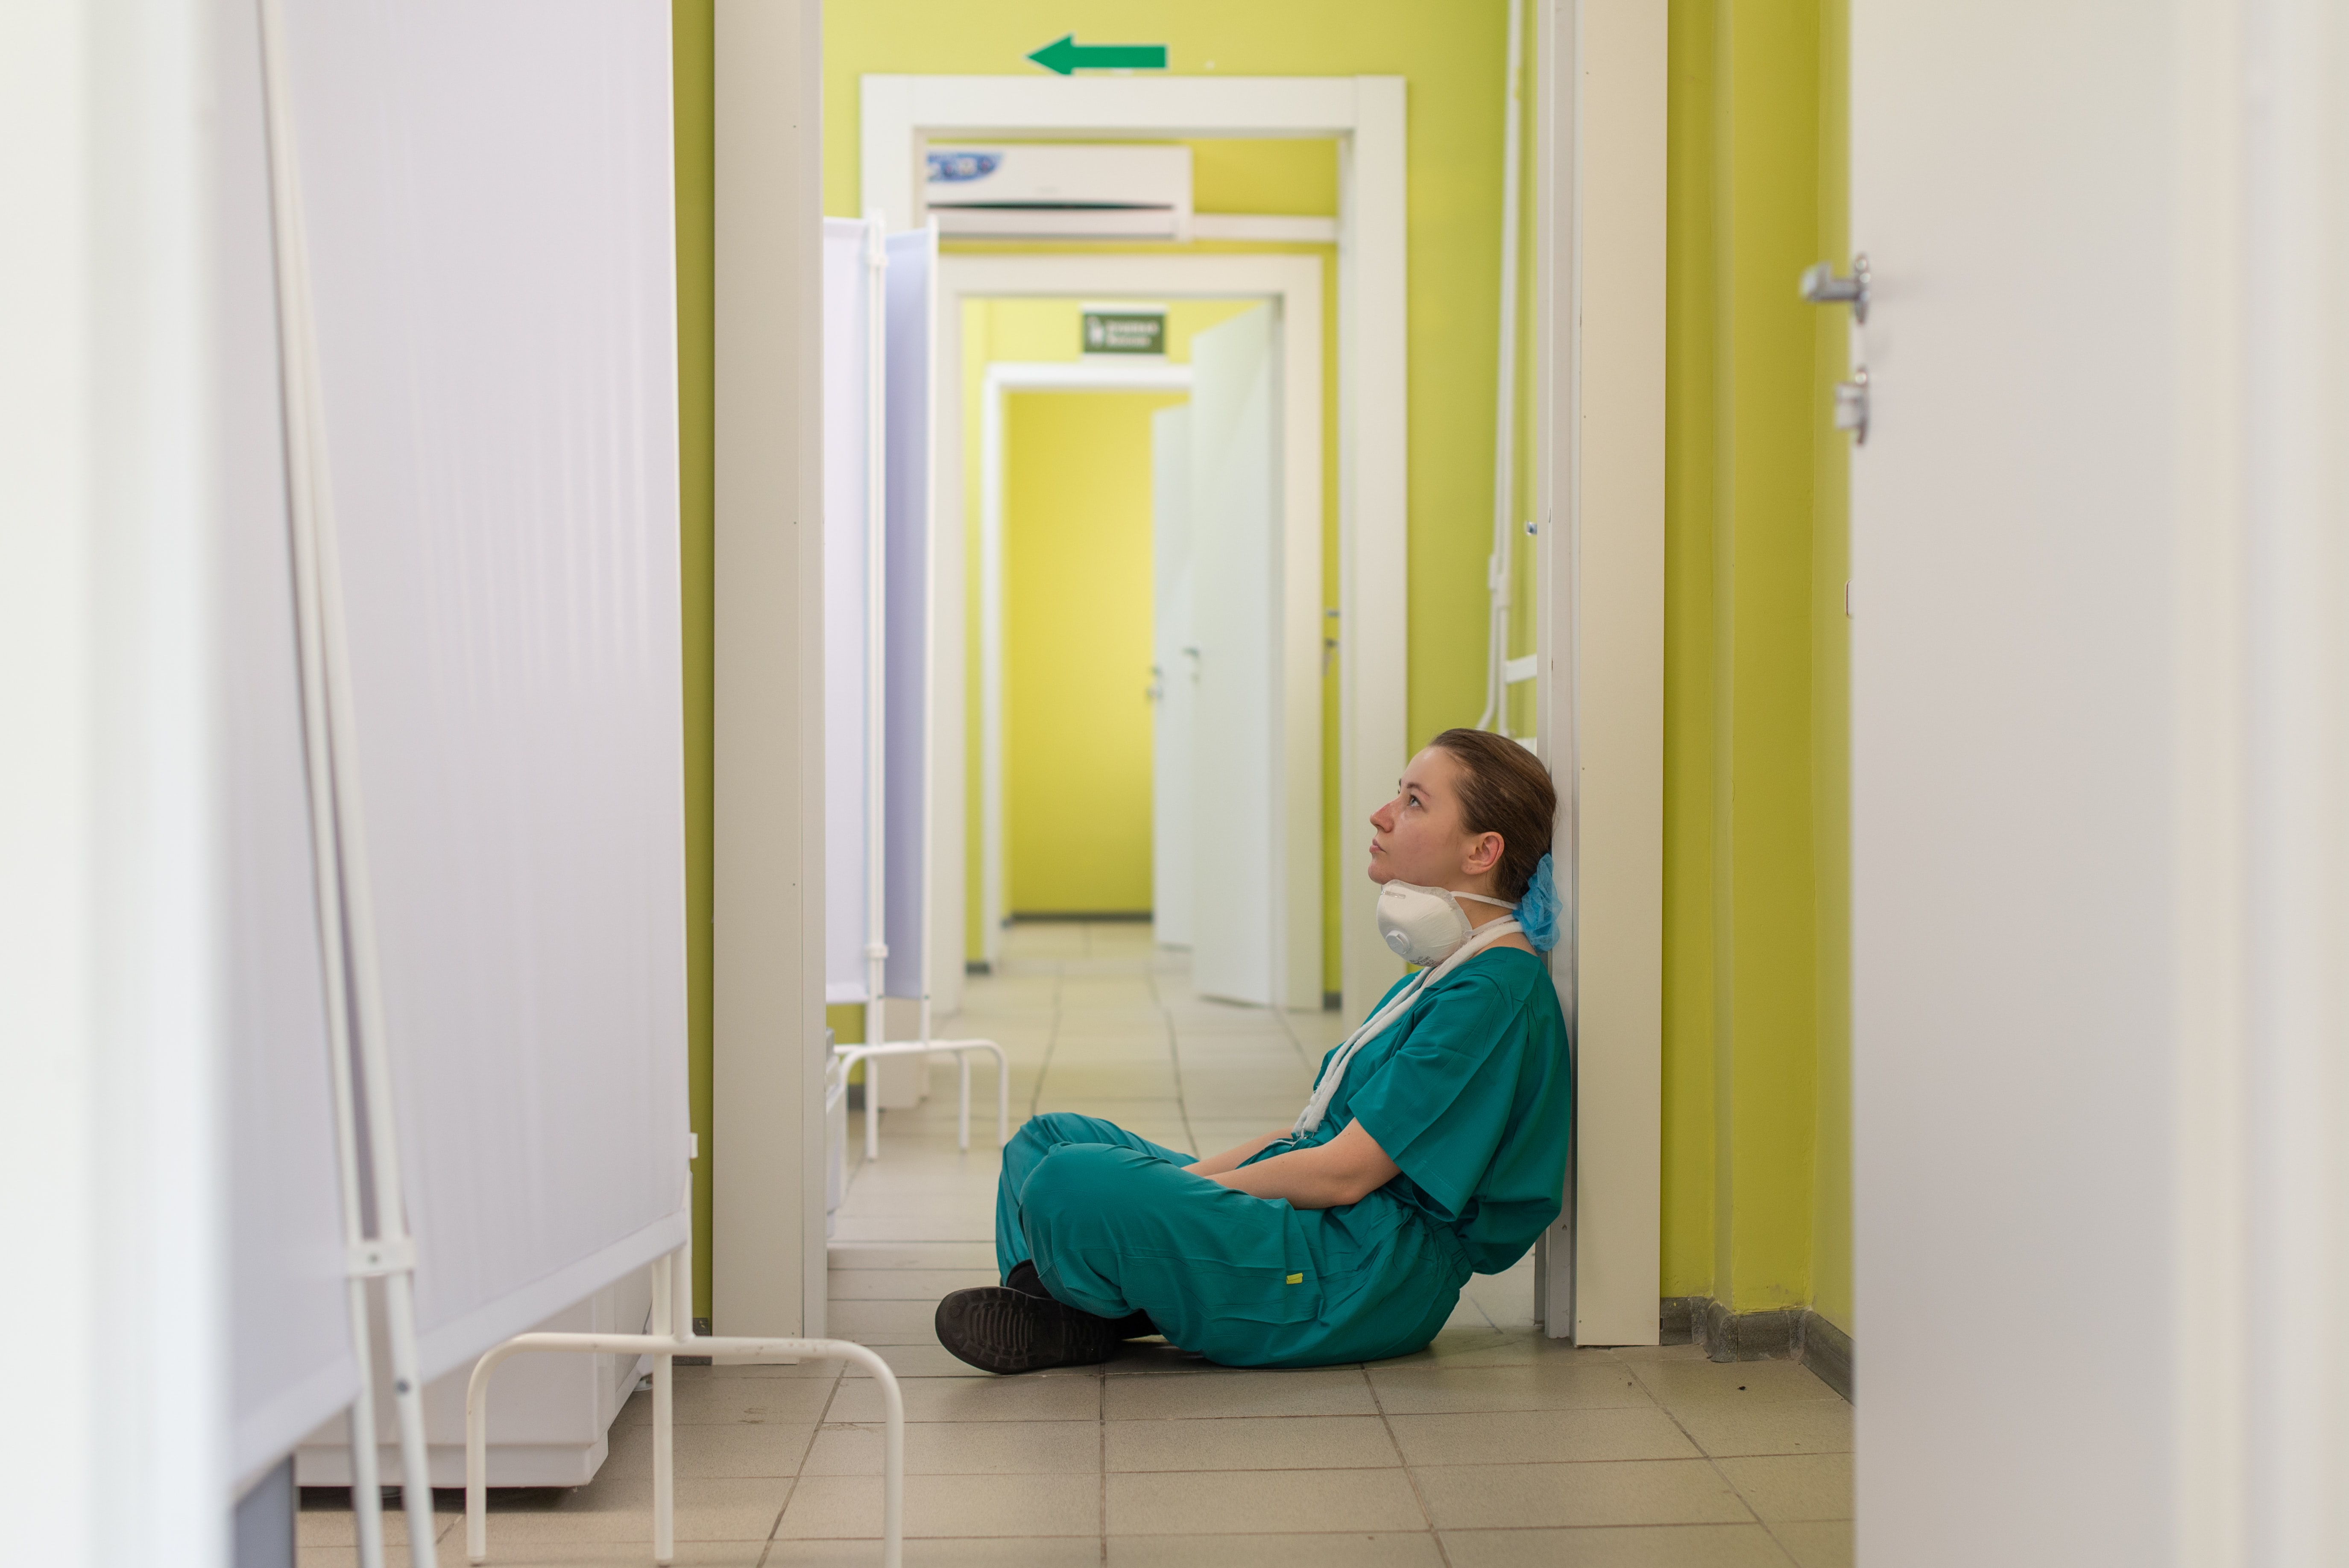 A tired nurse wearing teal scrubs sits on the floor of a hospital